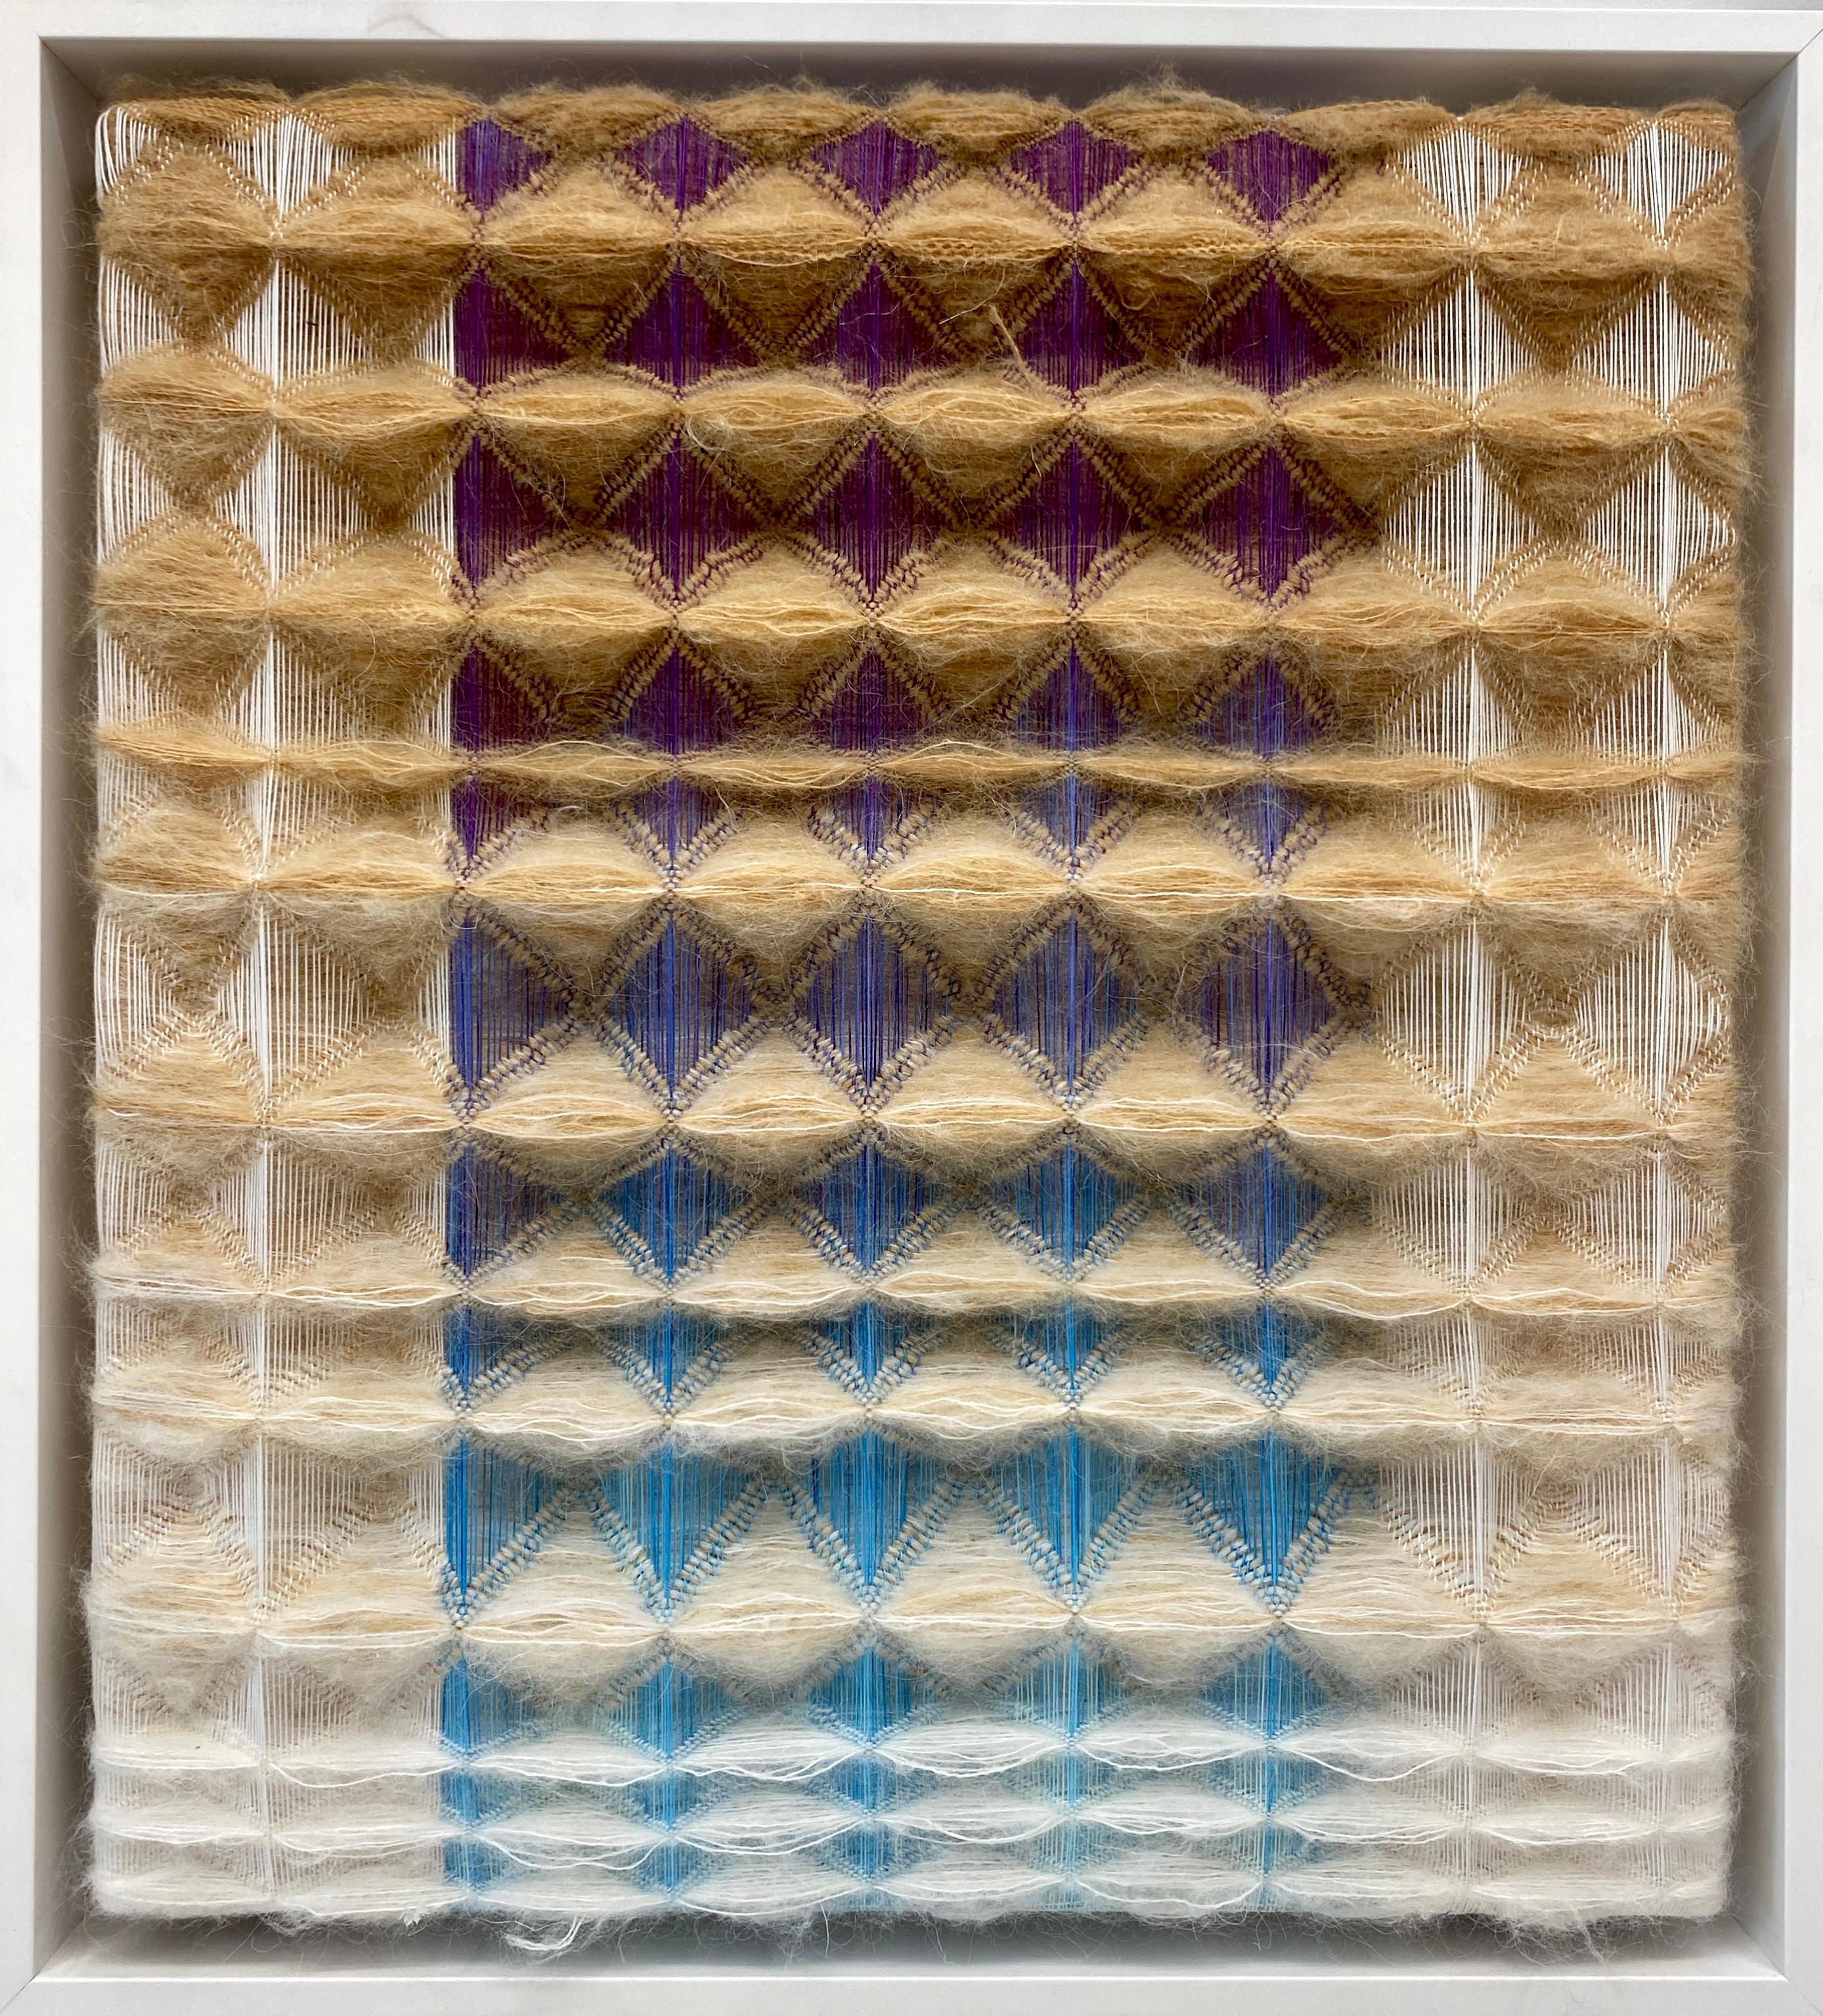 Dune, Contemporary 3D Textile, Framed, Geometric, Structural  - Art by Anya Molyviatis